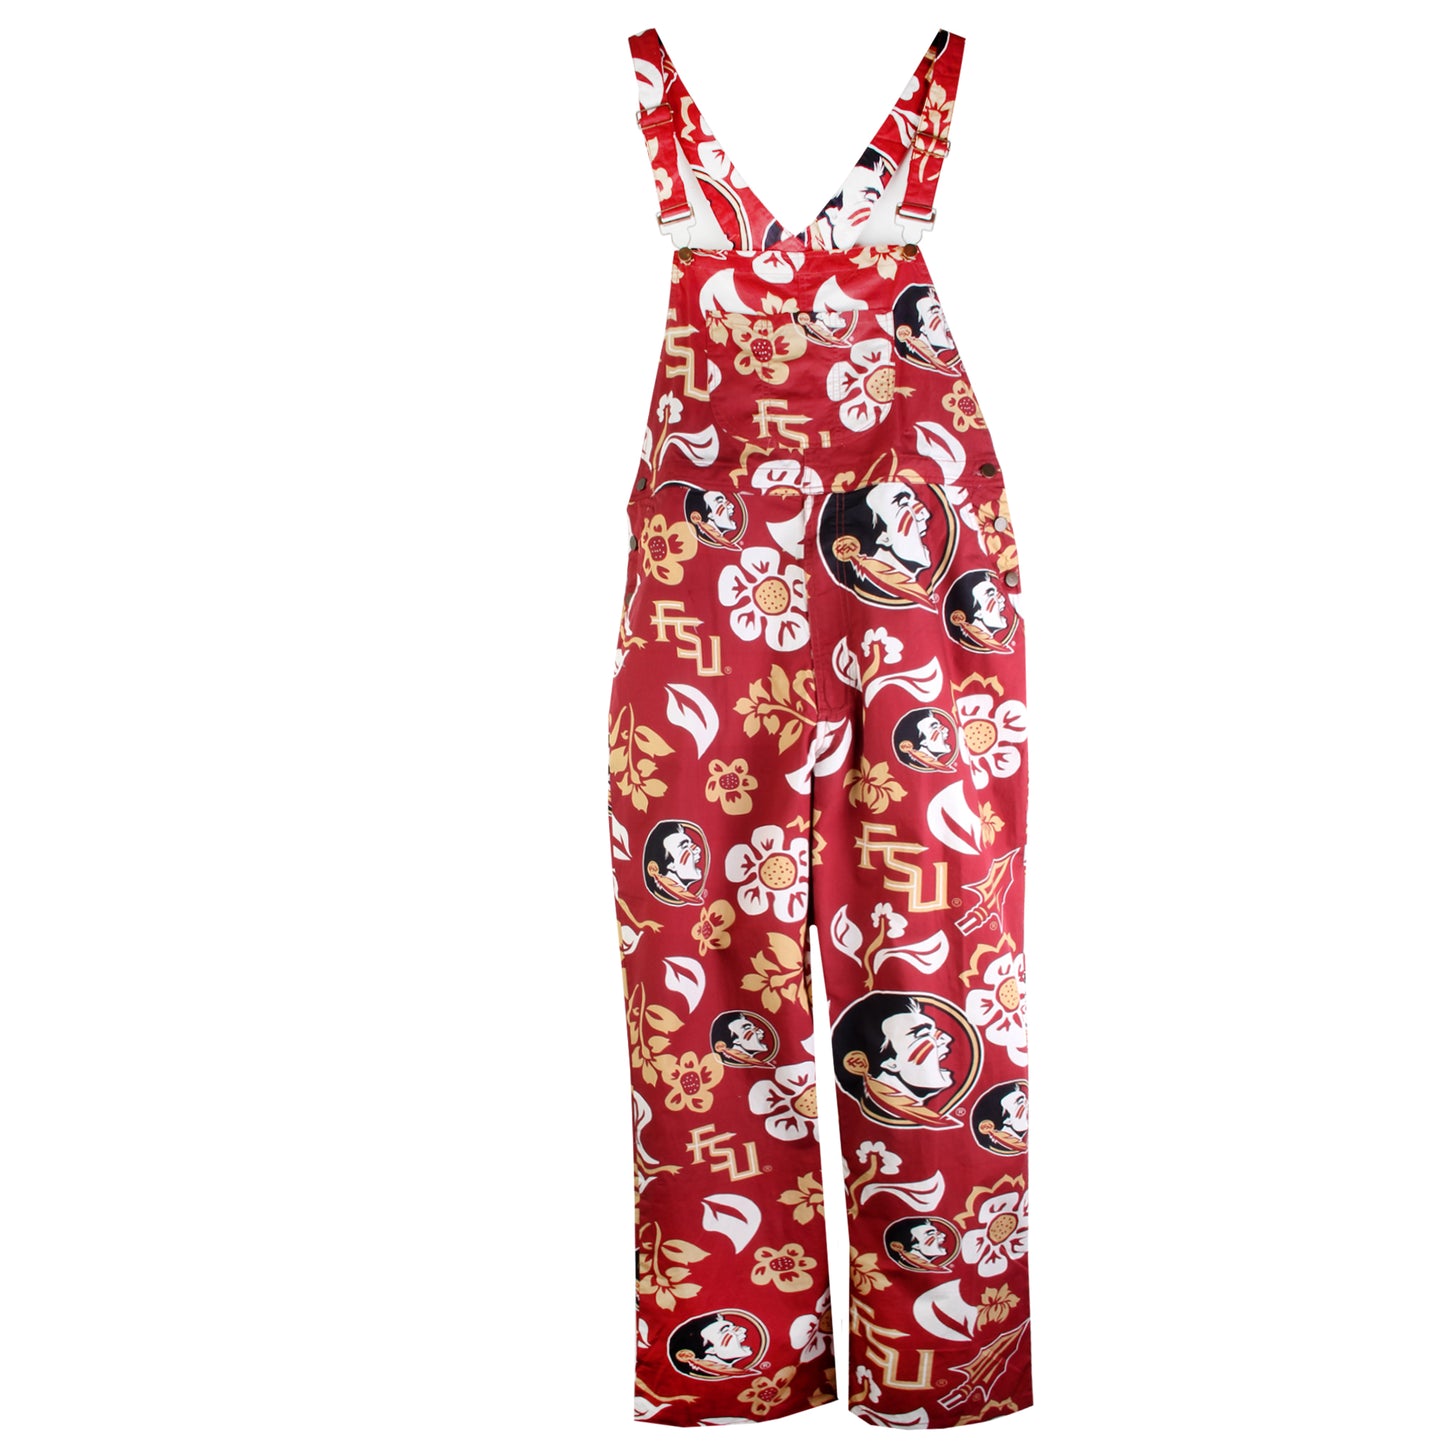 Florida State Seminoles Wes and Willy Mens College Floral Lightweight Fashion Overalls